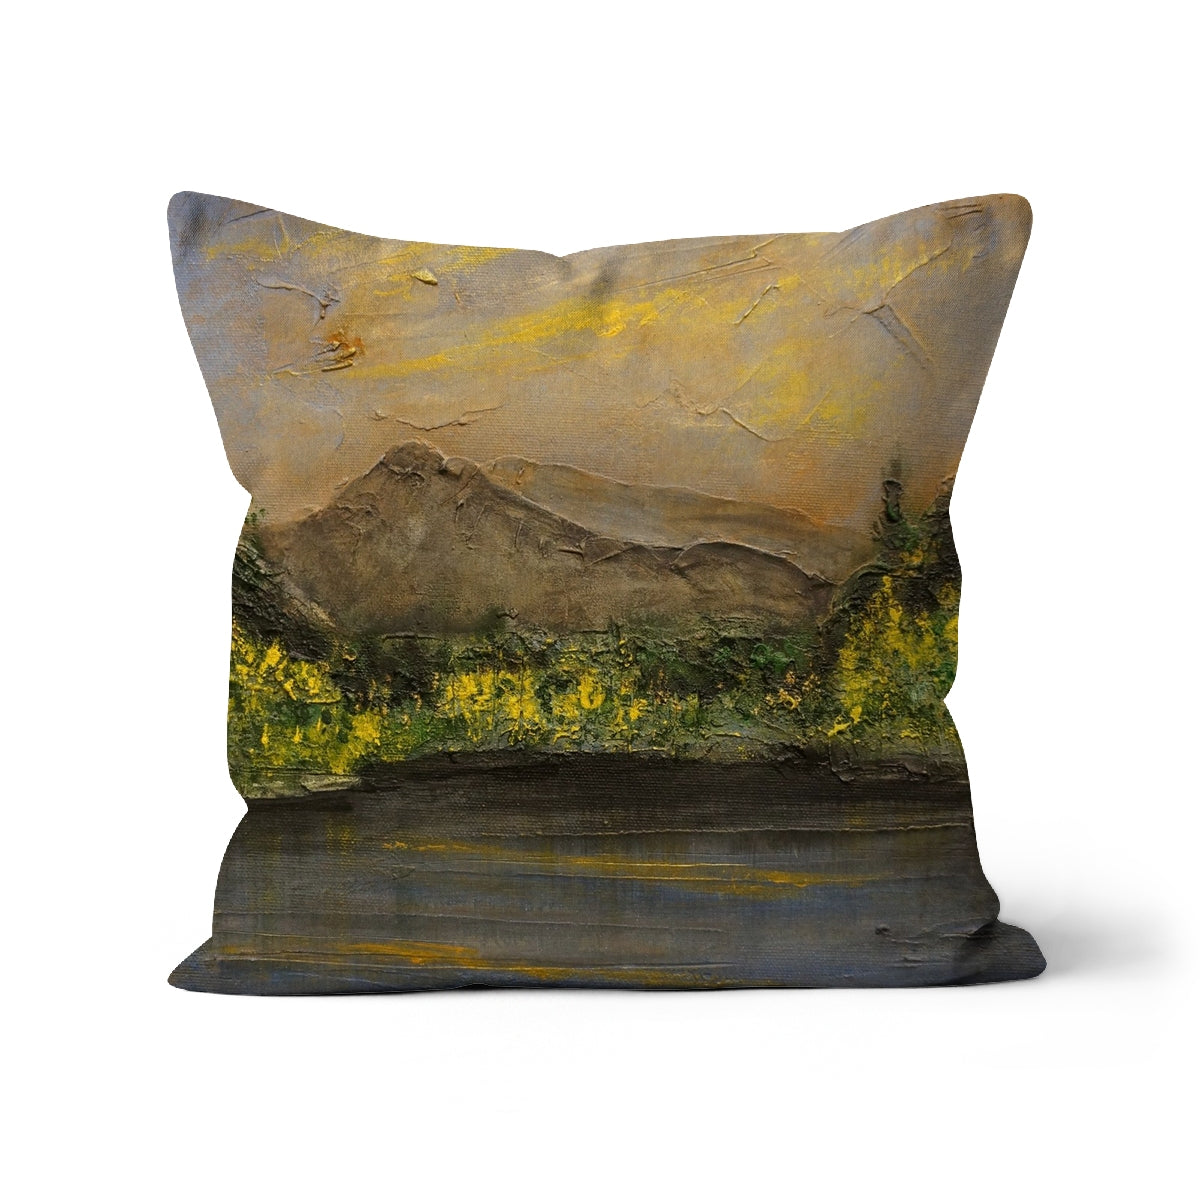 Glencoe Lochan Dusk Art Gifts Cushion-Cushions-Scottish Lochs & Mountains Art Gallery-Faux Suede-16"x16"-Paintings, Prints, Homeware, Art Gifts From Scotland By Scottish Artist Kevin Hunter